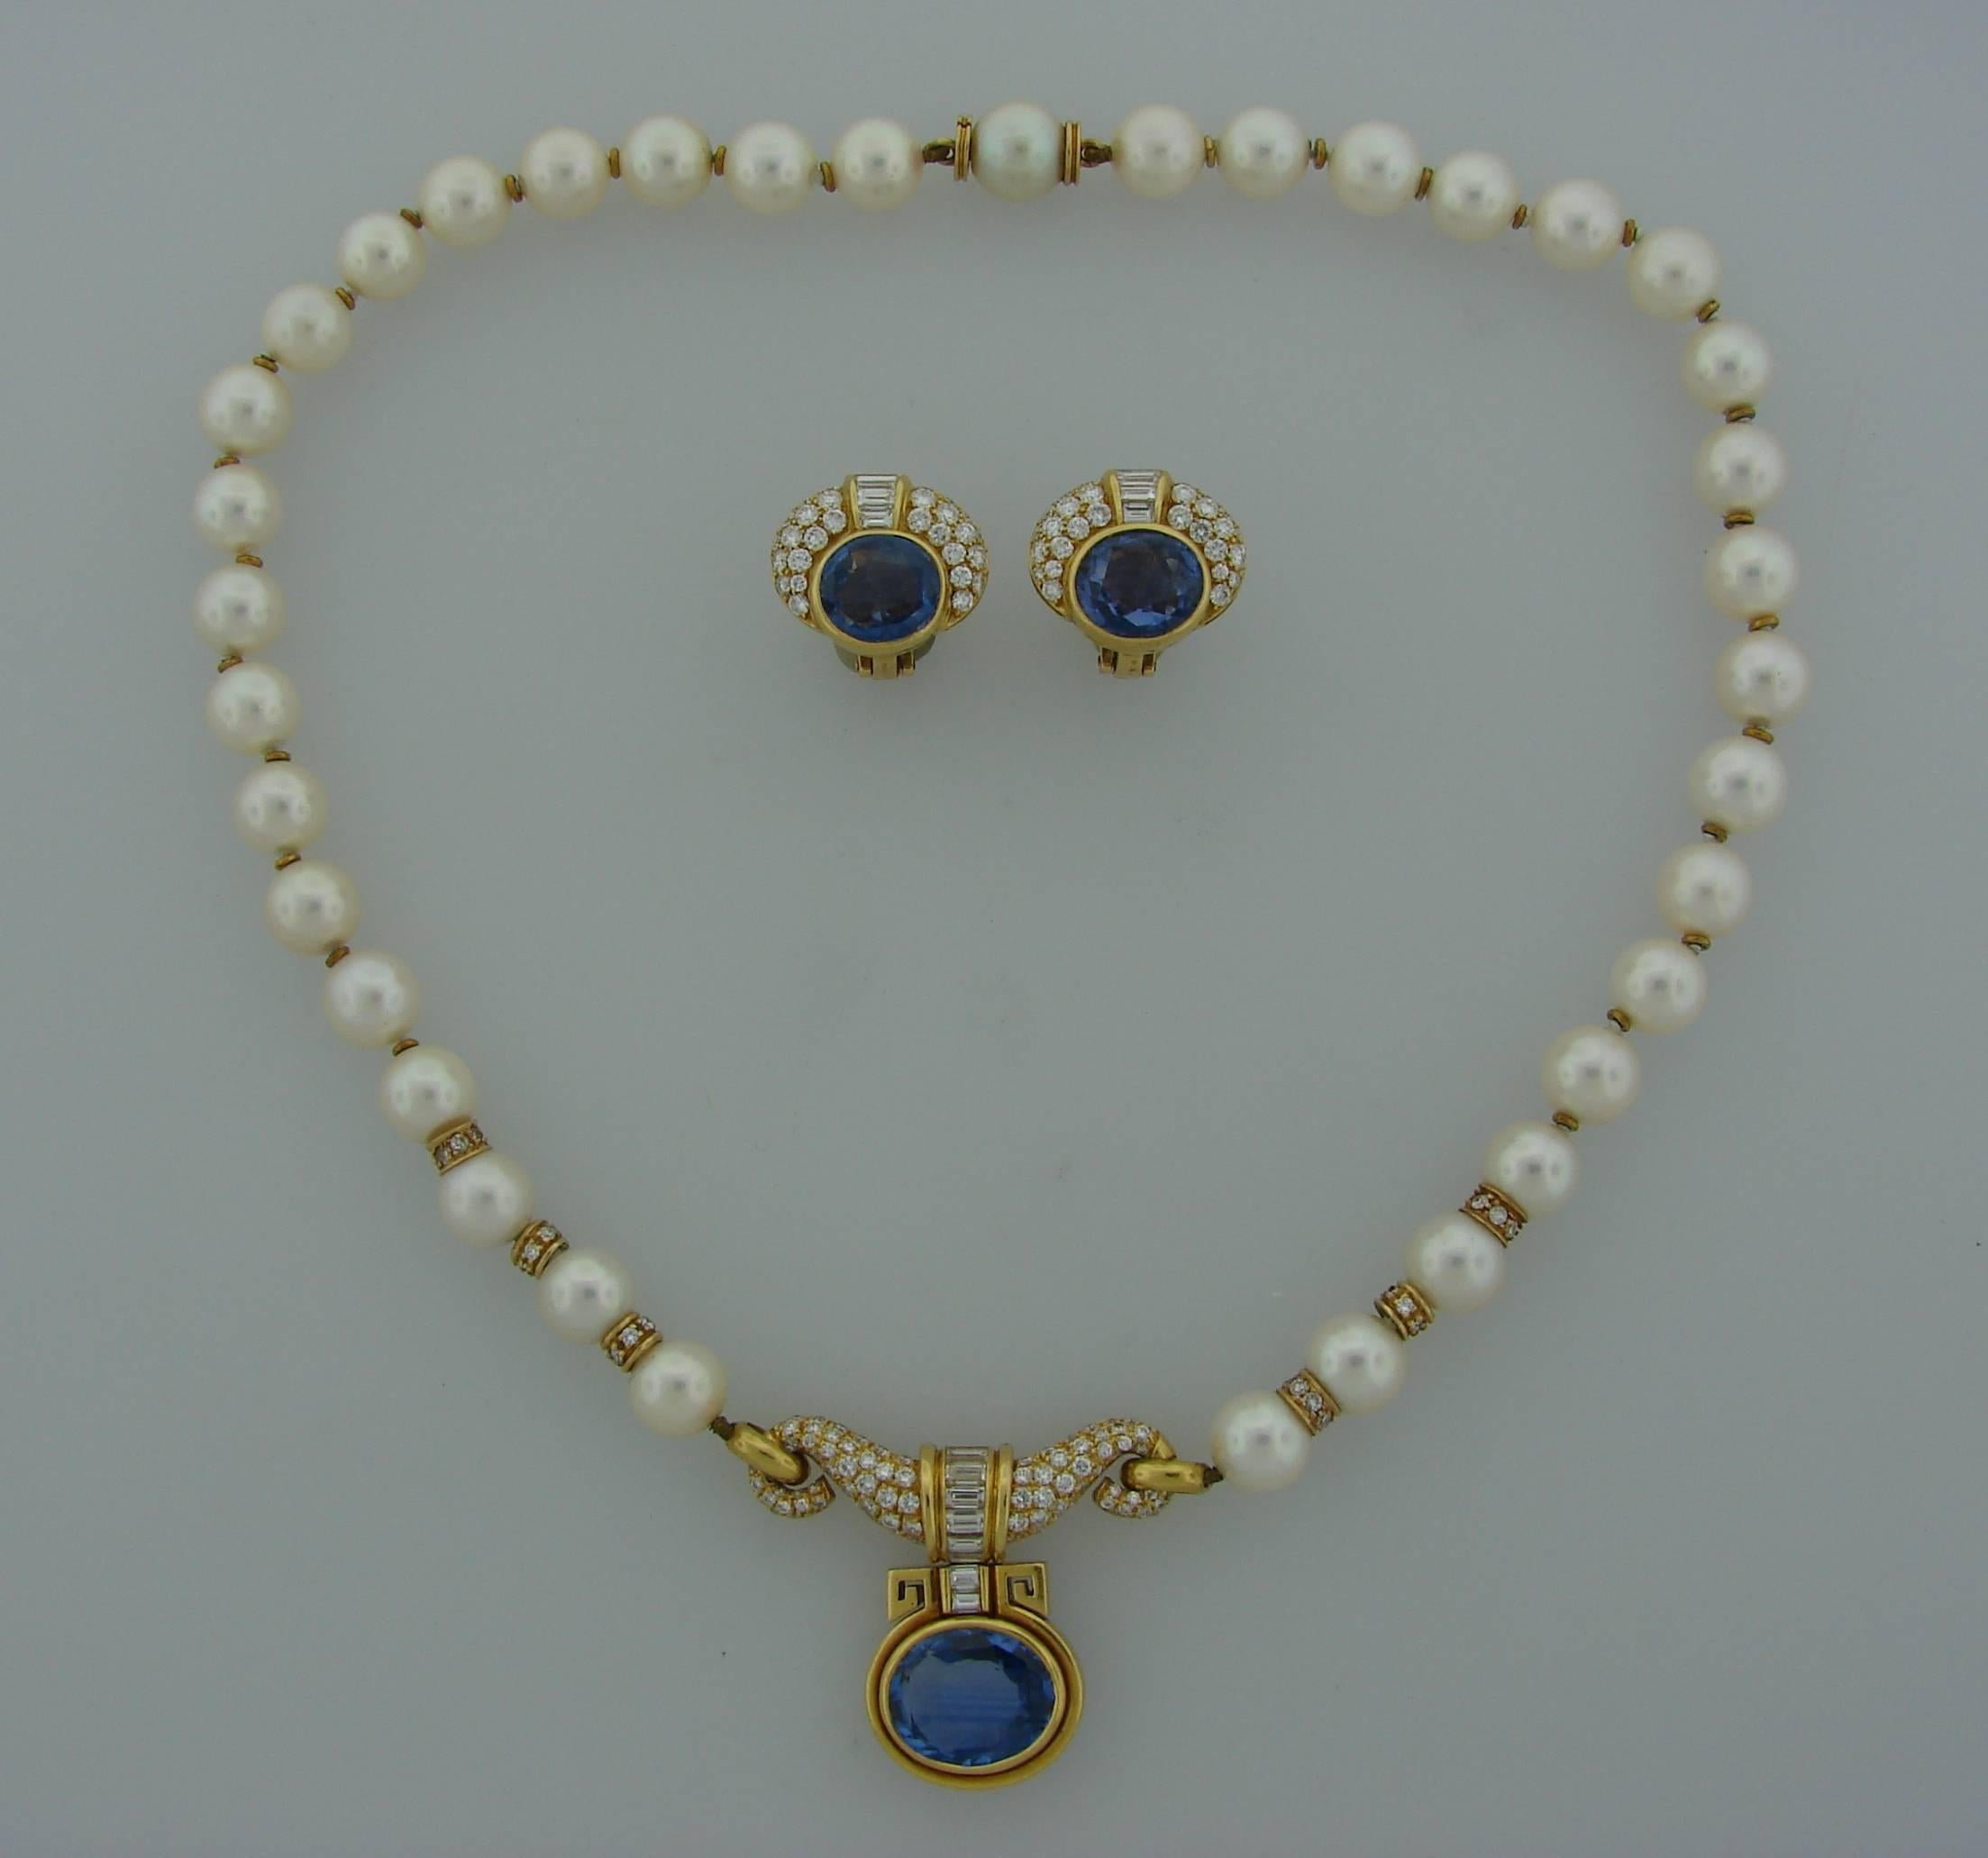 Elegant and timeless set consisting of a necklace and a pair of earrings. Created by Bulgari in Italy in the 1980's. Features thirty seven Akoya pearls, oval faceted blue sapphires set in 18k yellow gold and accented with round brilliant and